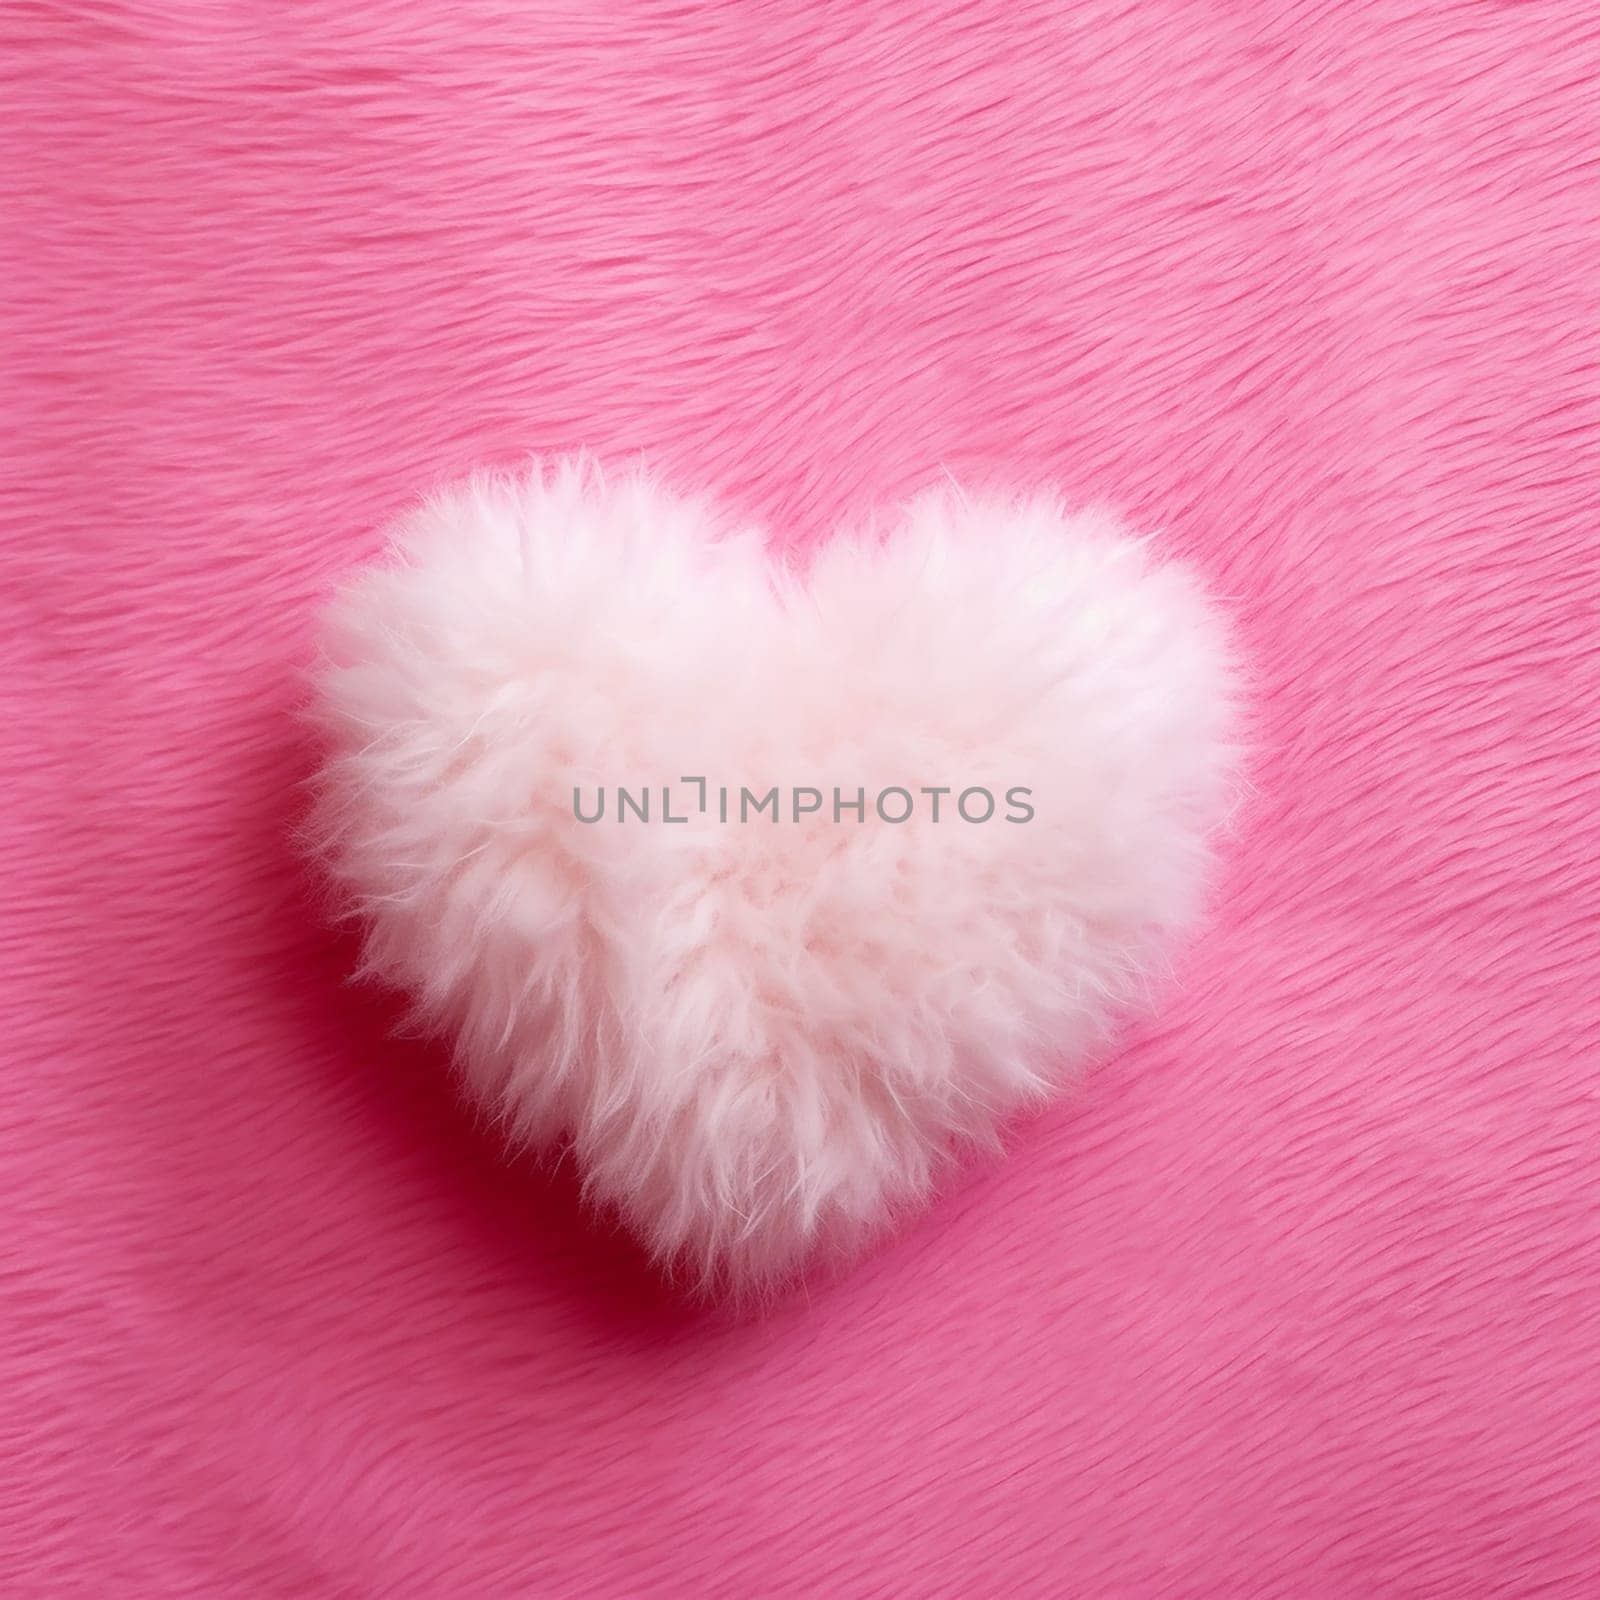 Fluffy white heart-shaped object on pink background